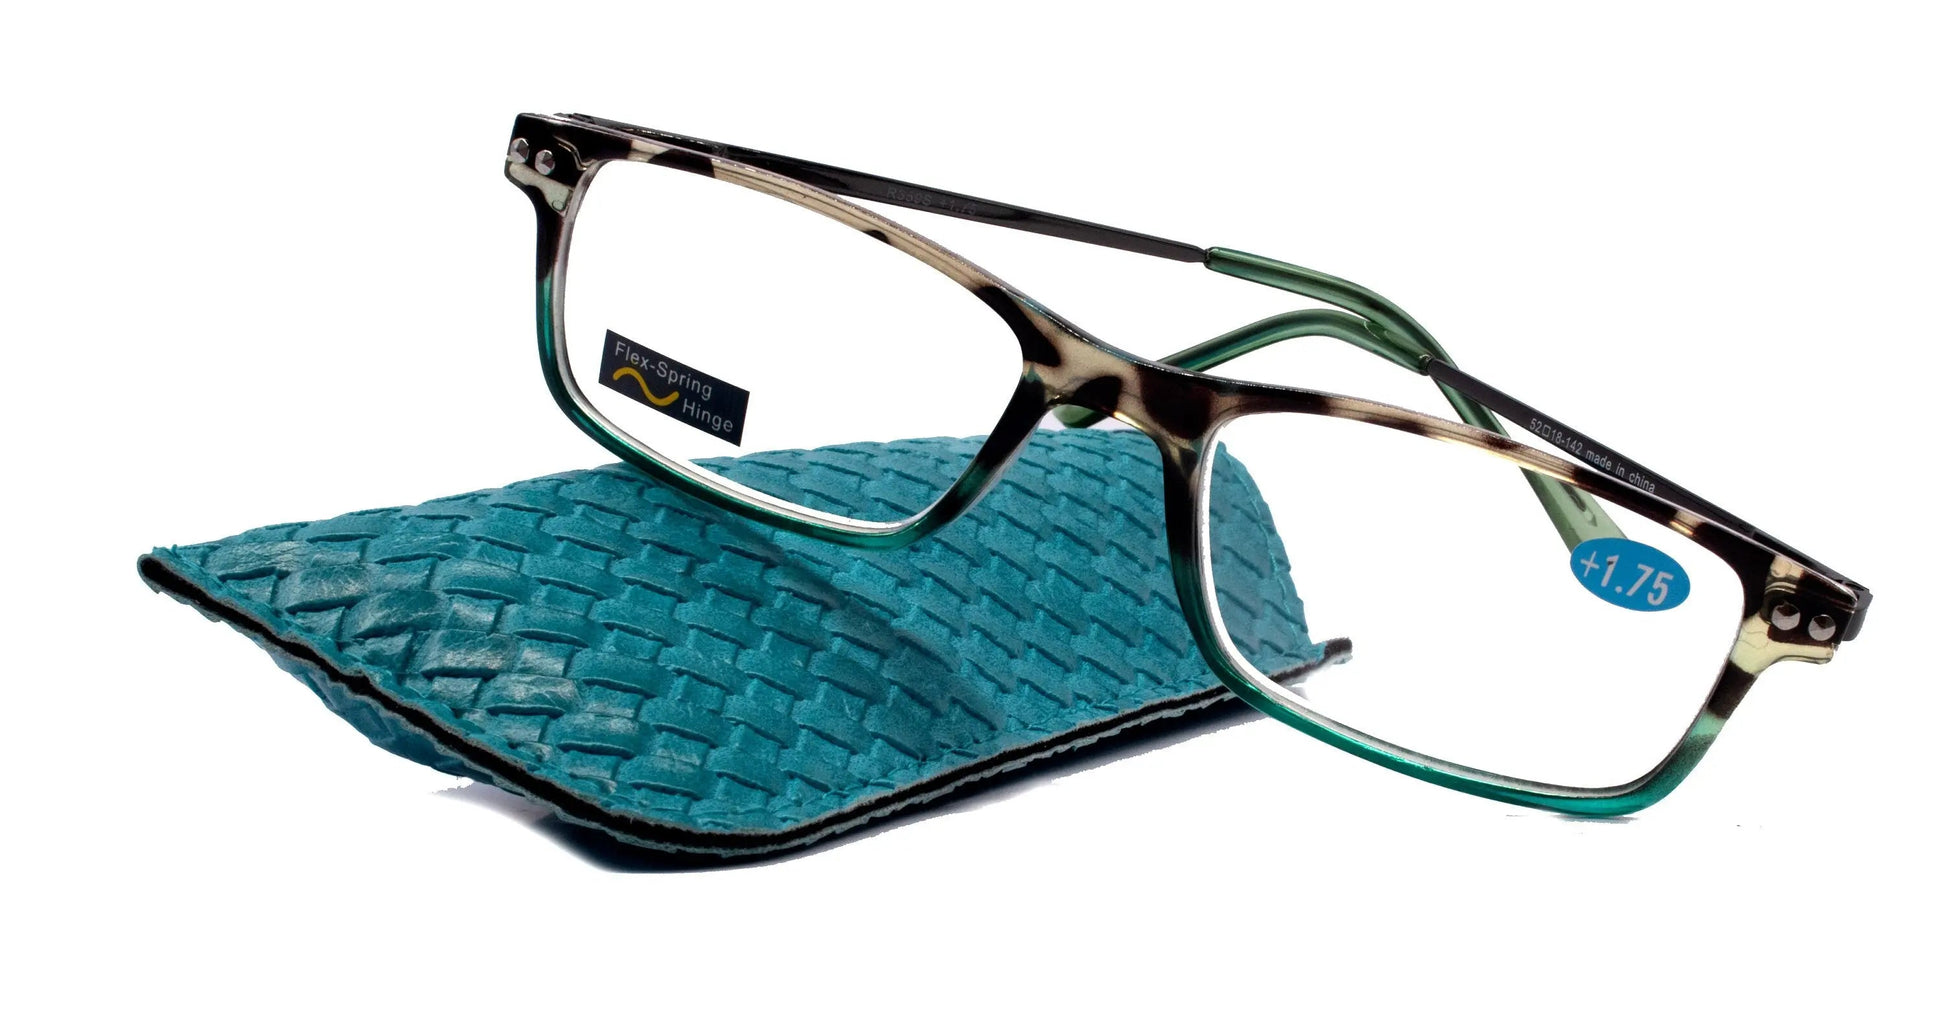 Vienna, (Premium) Reading Glasses High End Readers (Tortoise Shell Blue) Rectangular +1.25..+3 Magnifying Metal Thin Temple NY Fifth Avenue.